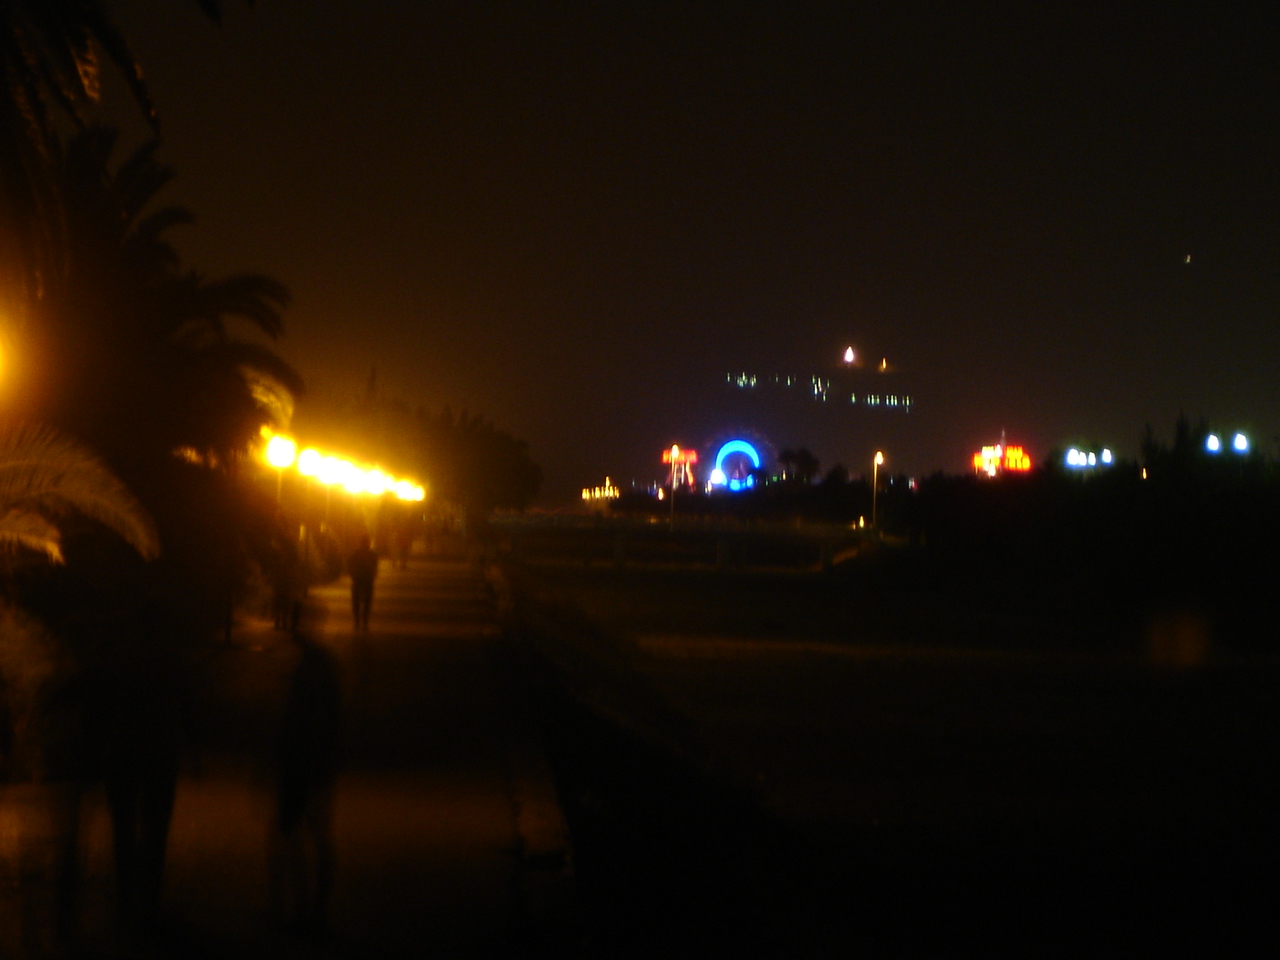 people walk along the sidewalk at night under the city lights